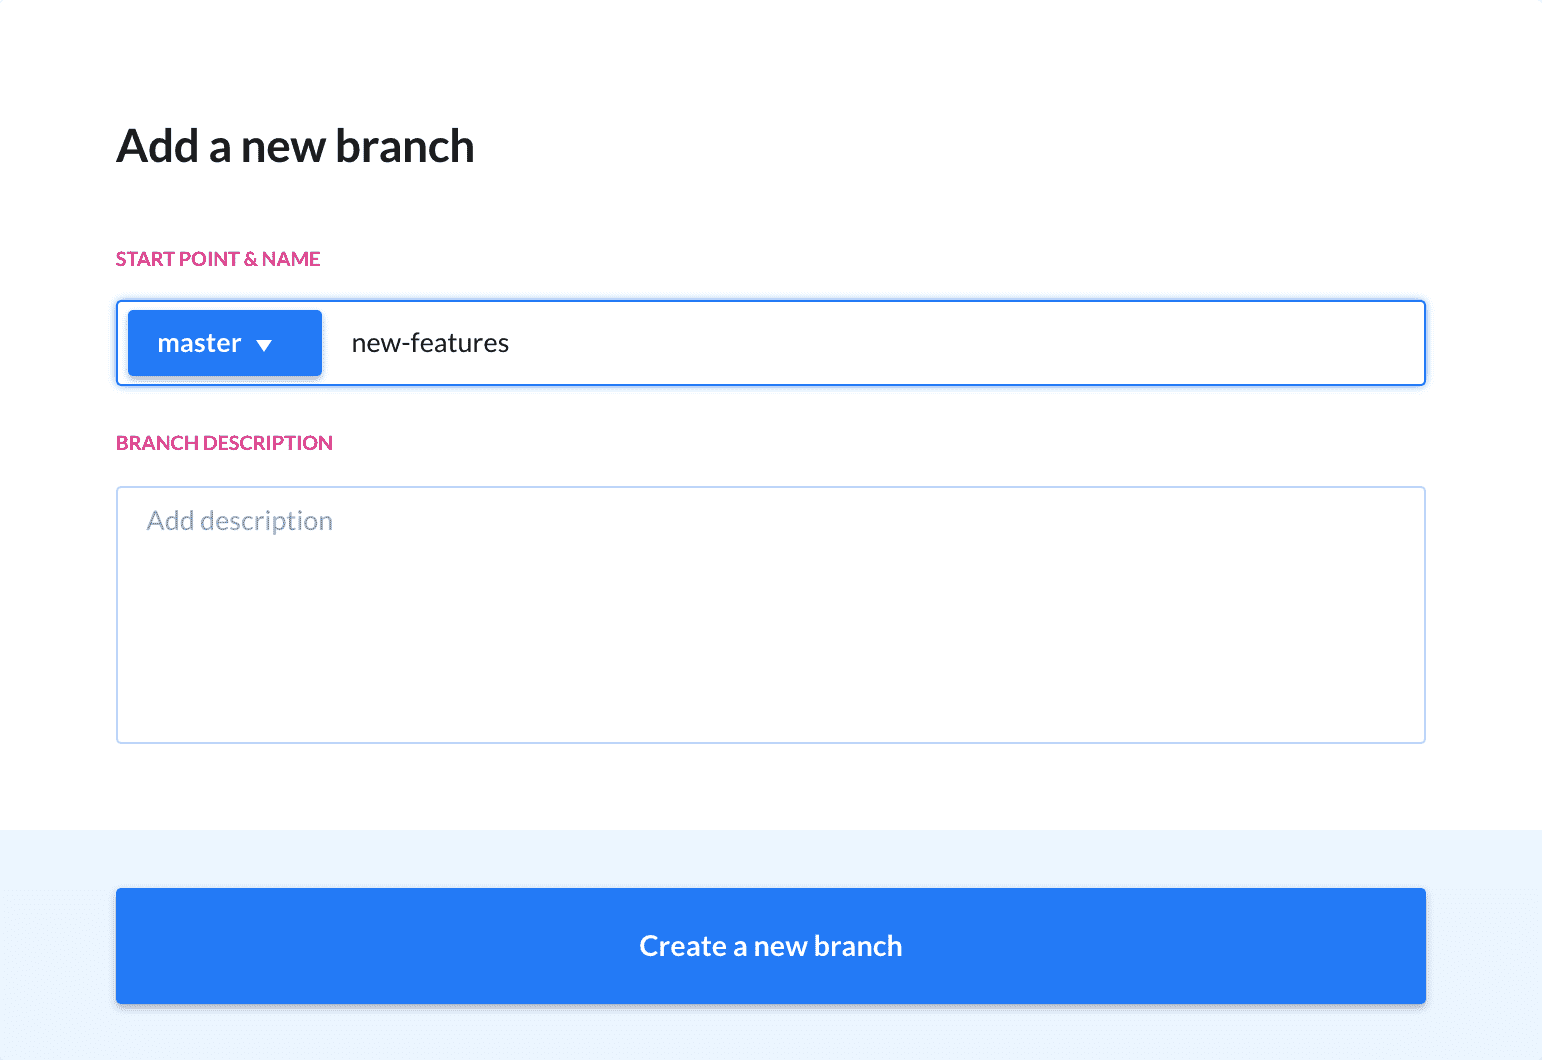 Creating a new branch